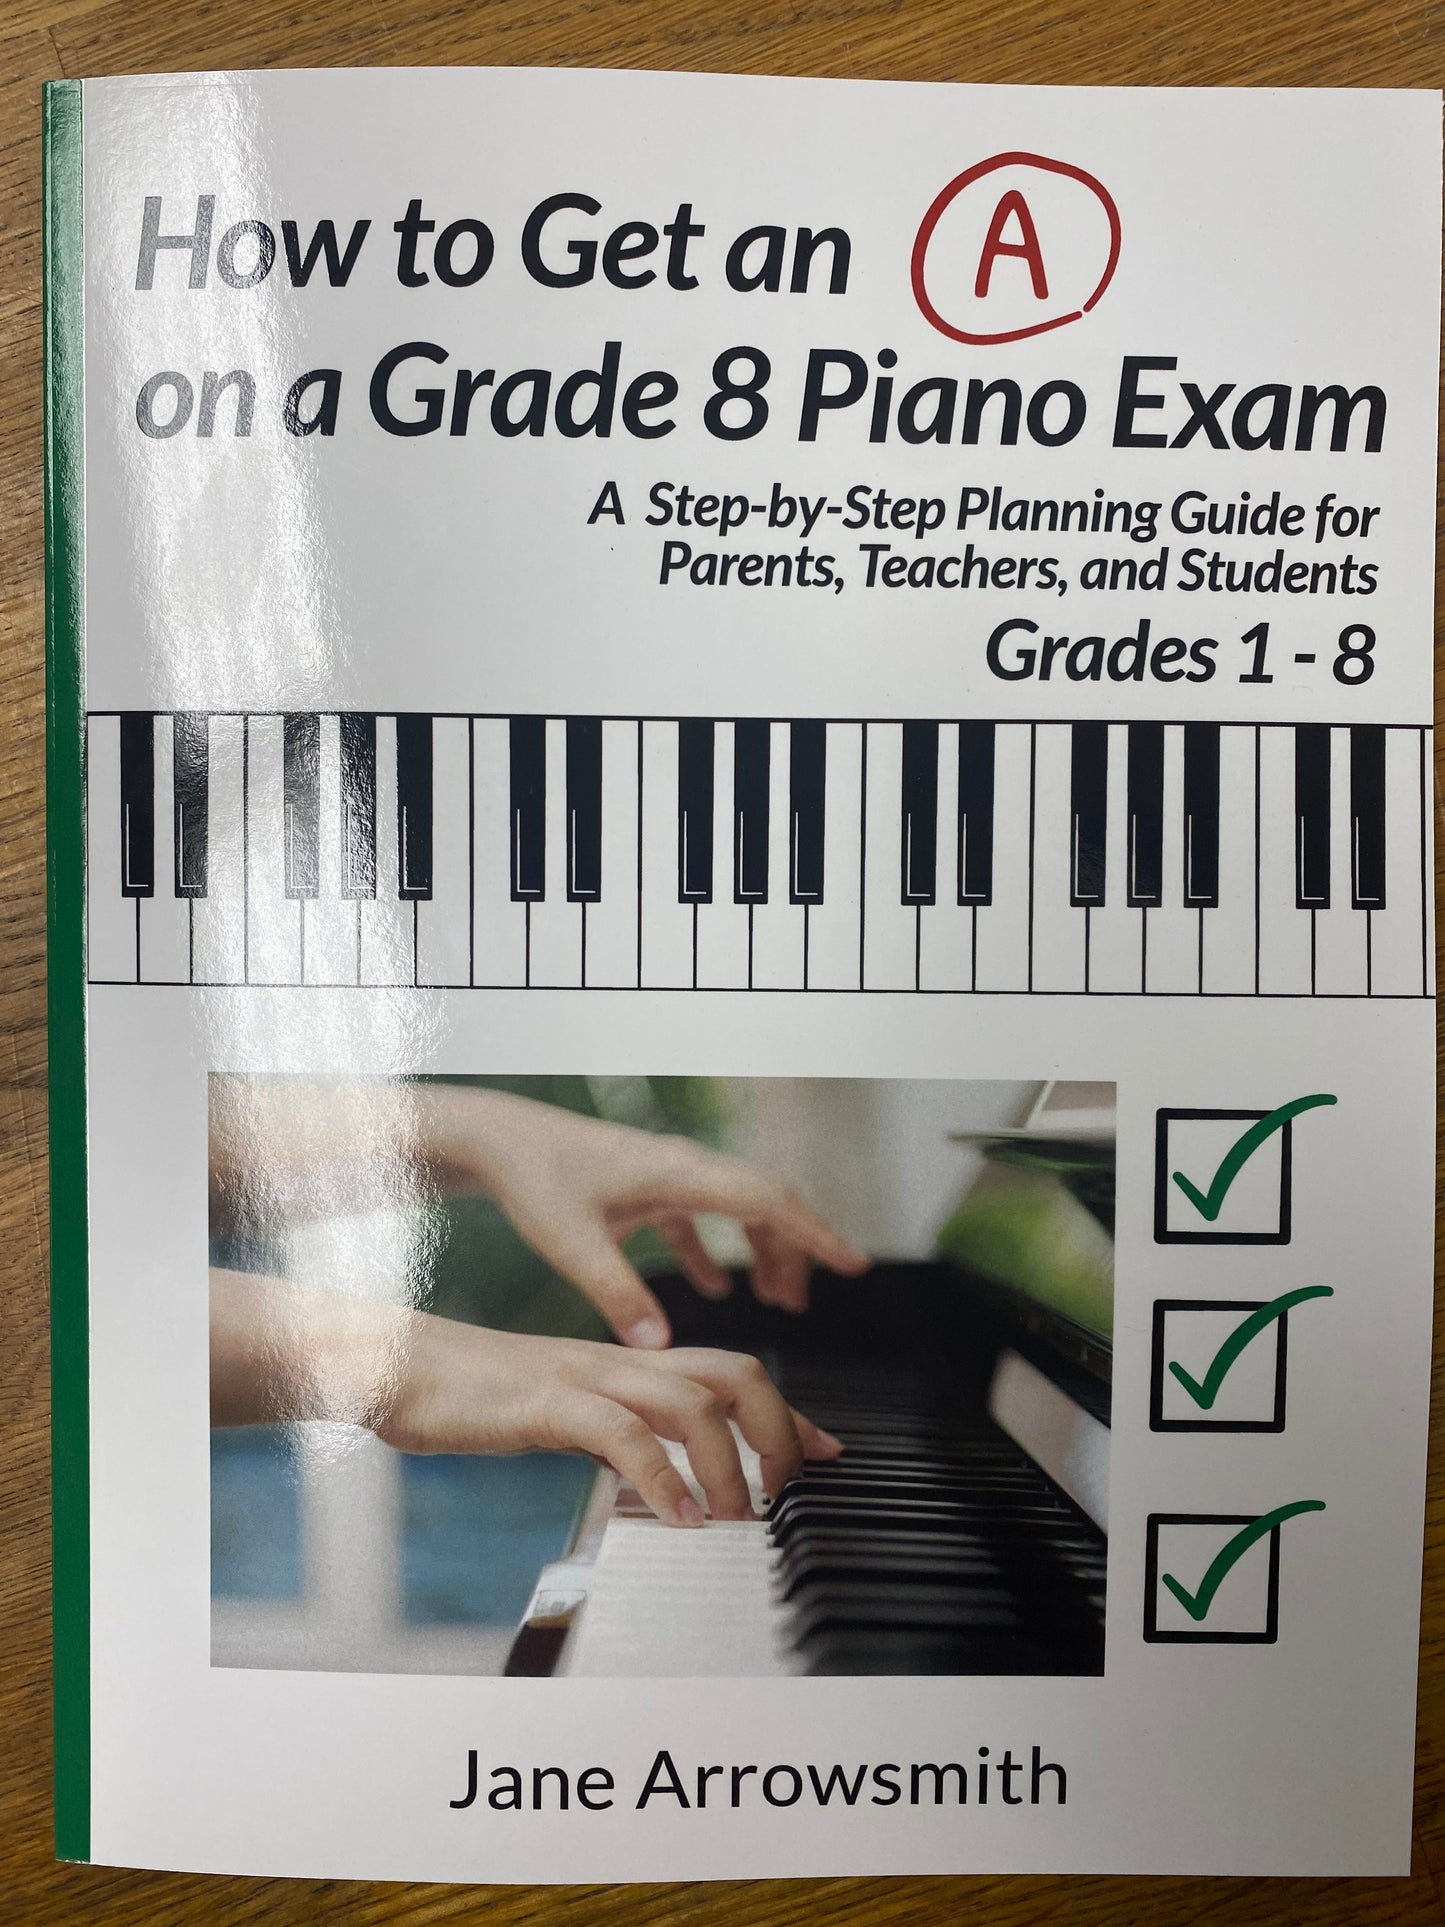 How to Get an “A” in Grade 8 Piano